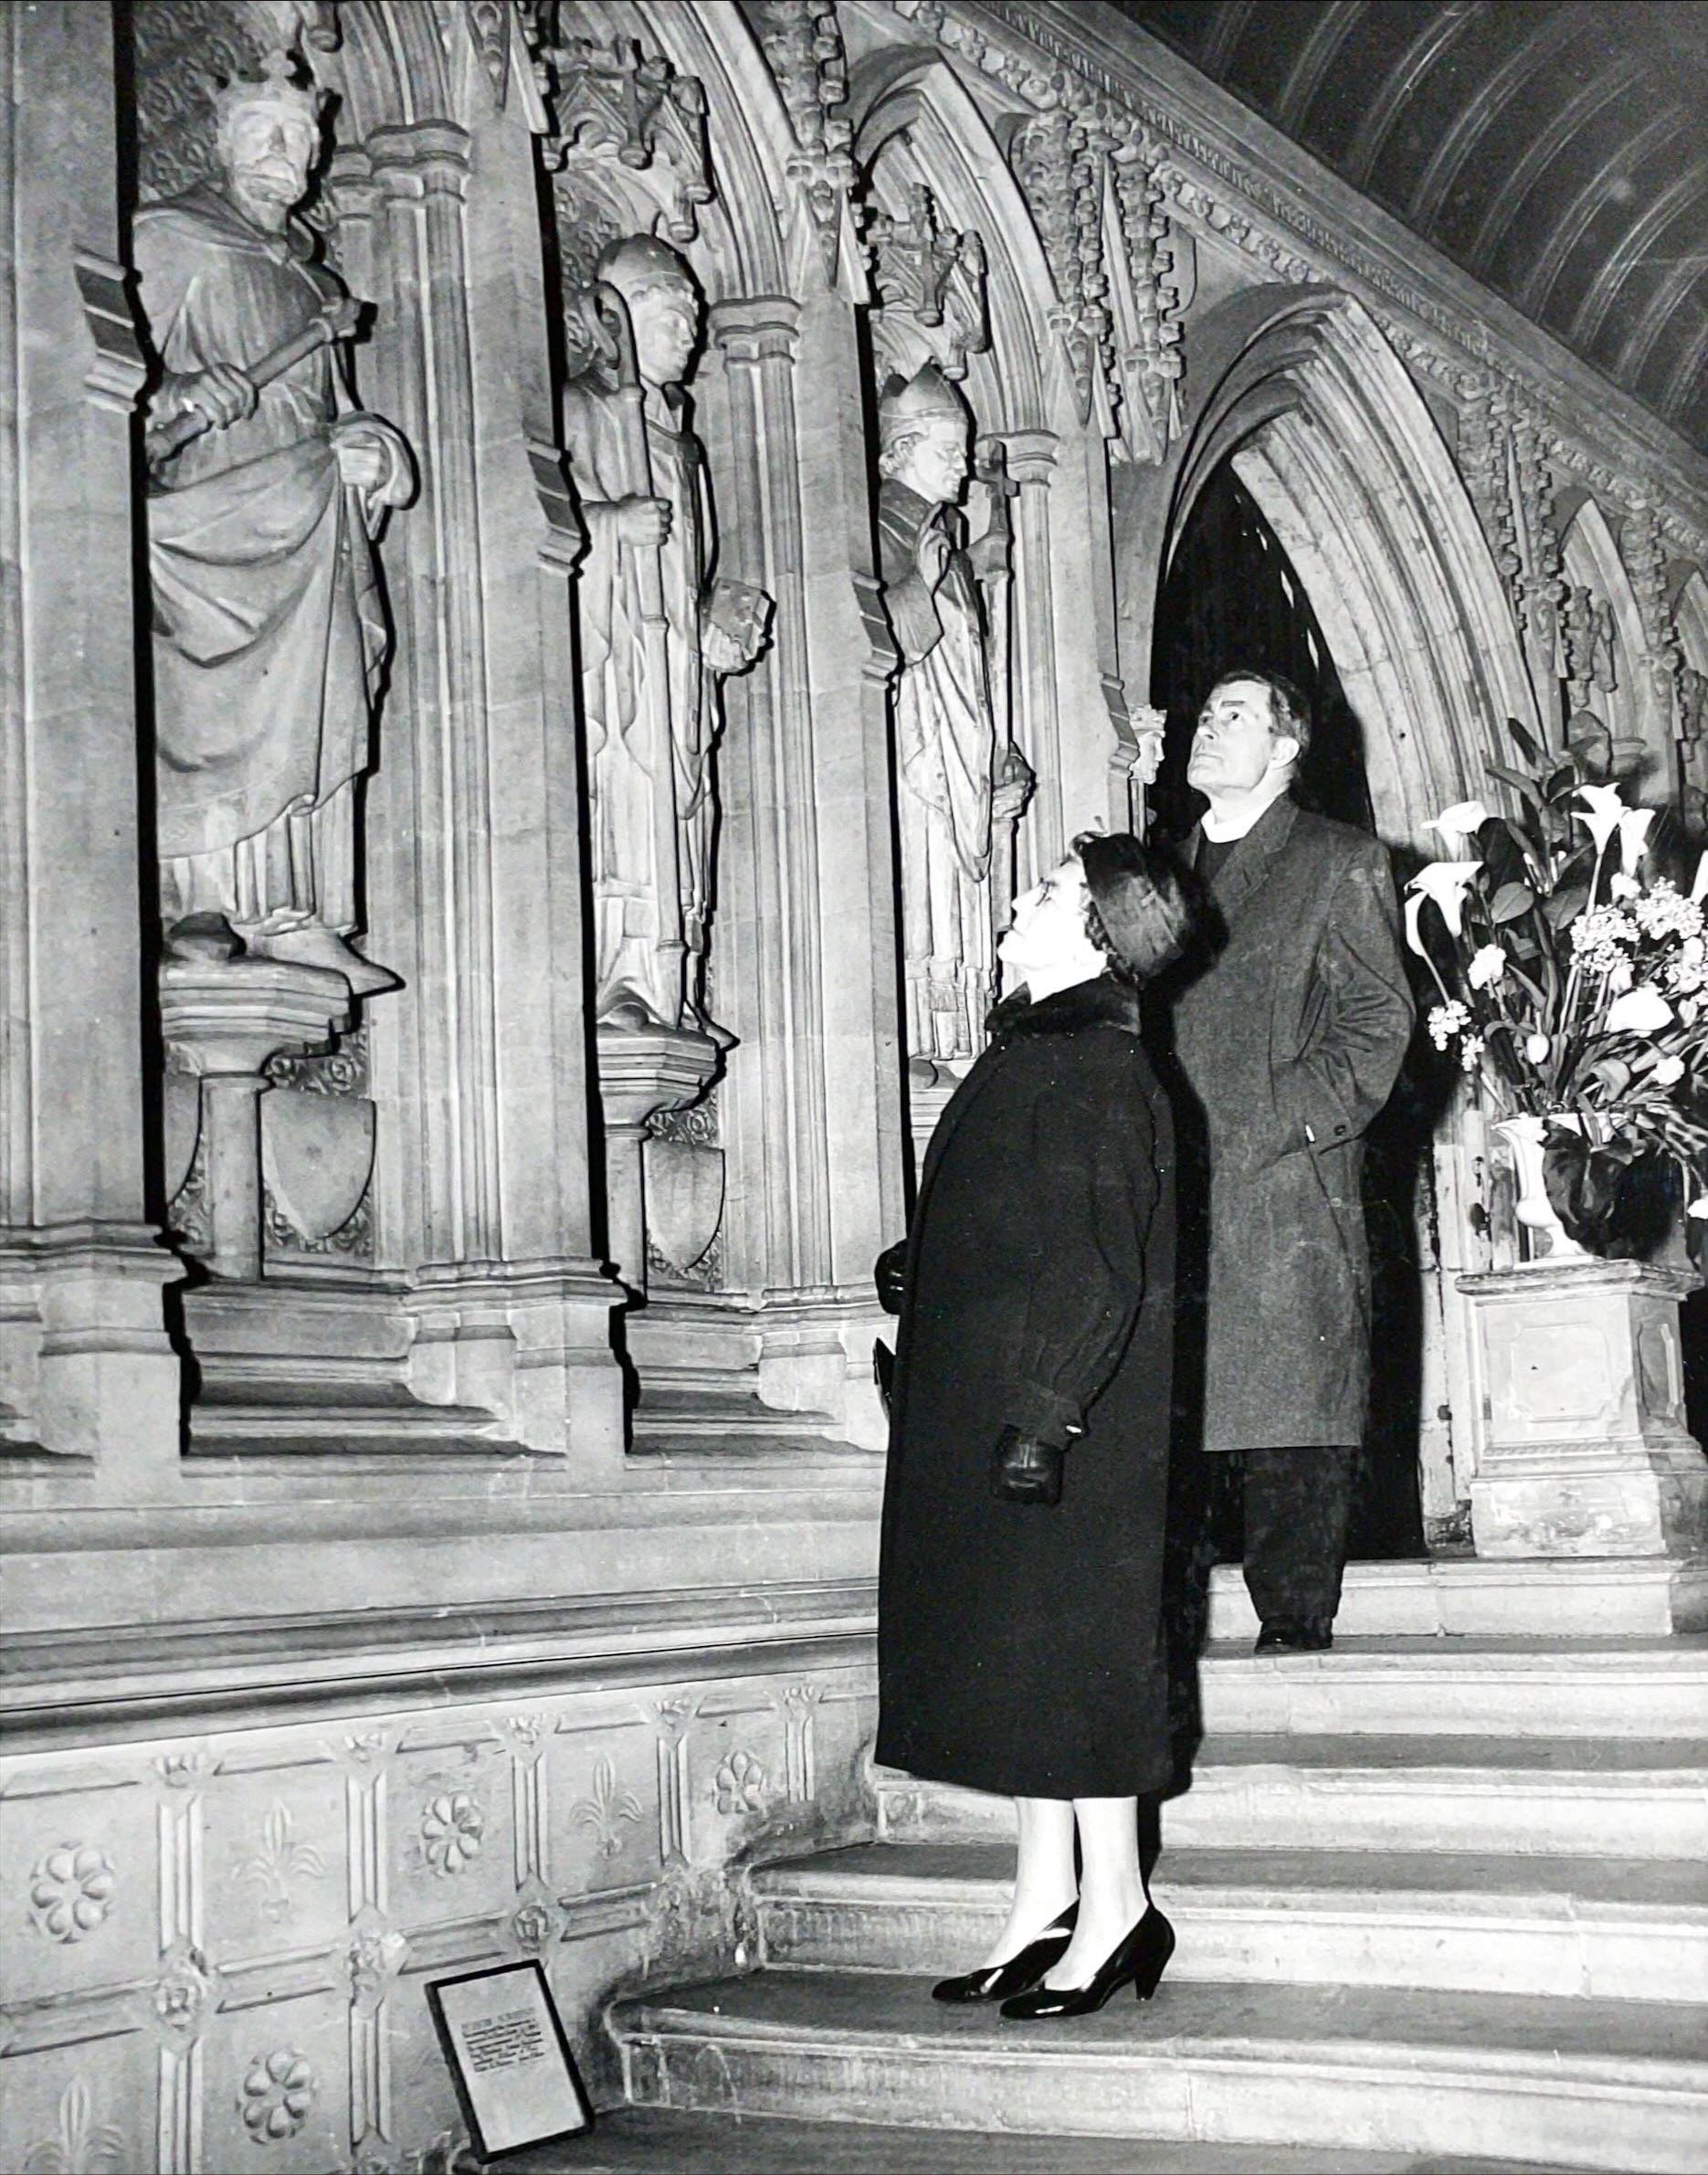 The new dean inspecting the Cathedral with his wife, January 1959